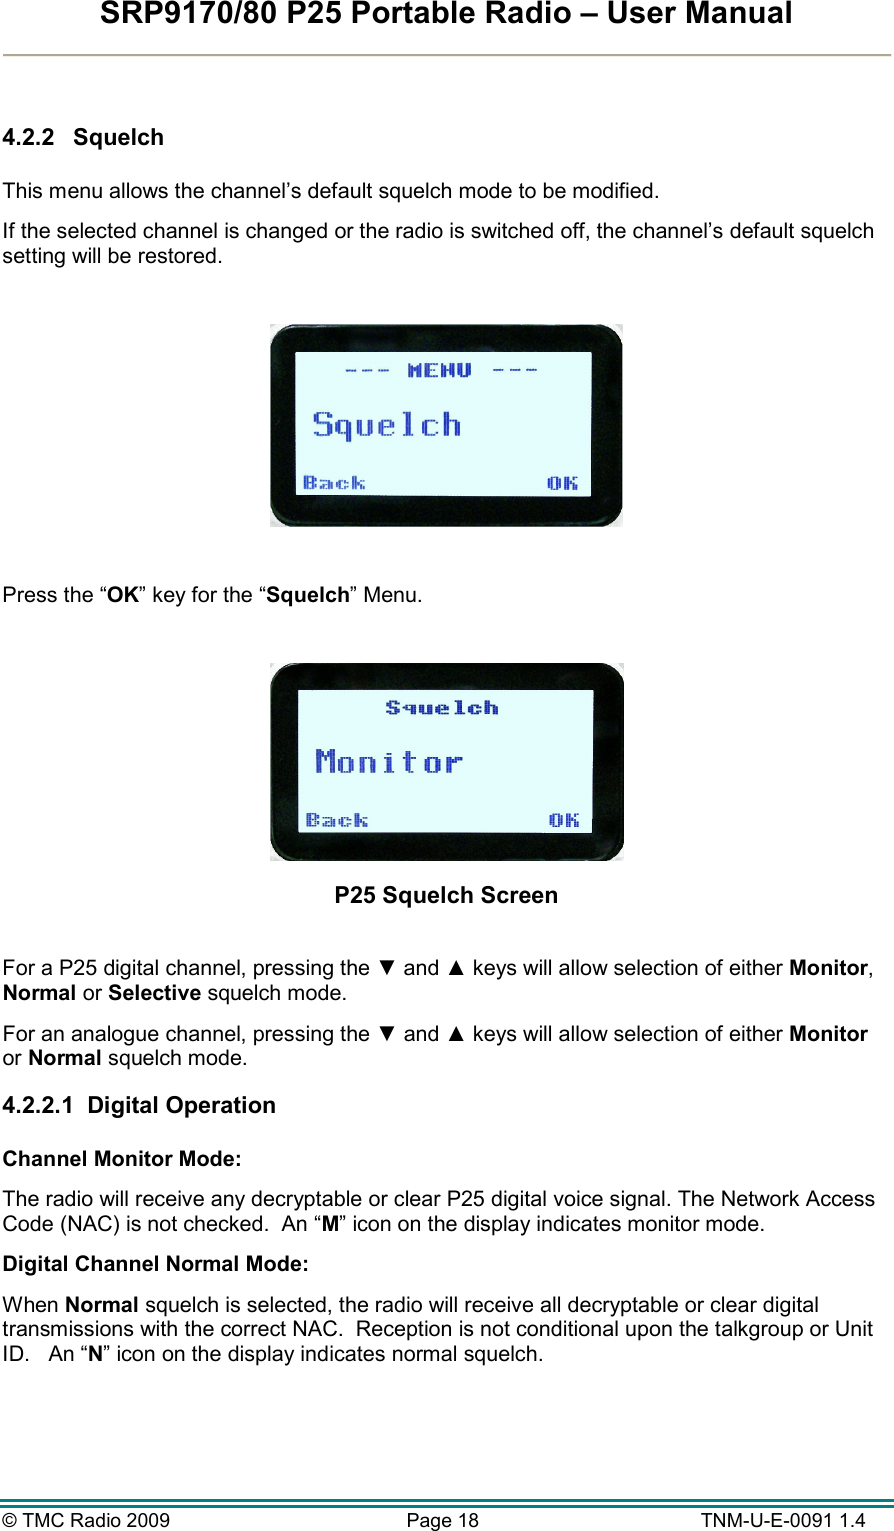 SRP9170/80 P25 Portable Radio – User Manual  © TMC Radio 2009  Page 18   TNM-U-E-0091 1.4  4.2.2  Squelch  This menu allows the channel’s default squelch mode to be modified. If the selected channel is changed or the radio is switched off, the channel’s default squelch setting will be restored.    Press the “OK” key for the “Squelch” Menu.   P25 Squelch Screen  For a P25 digital channel, pressing the ▼ and ▲ keys will allow selection of either Monitor, Normal or Selective squelch mode.   For an analogue channel, pressing the ▼ and ▲ keys will allow selection of either Monitor or Normal squelch mode.   4.2.2.1  Digital Operation  Channel Monitor Mode:   The radio will receive any decryptable or clear P25 digital voice signal. The Network Access Code (NAC) is not checked.  An “M” icon on the display indicates monitor mode. Digital Channel Normal Mode: When Normal squelch is selected, the radio will receive all decryptable or clear digital transmissions with the correct NAC.  Reception is not conditional upon the talkgroup or Unit ID.   An “N” icon on the display indicates normal squelch.   